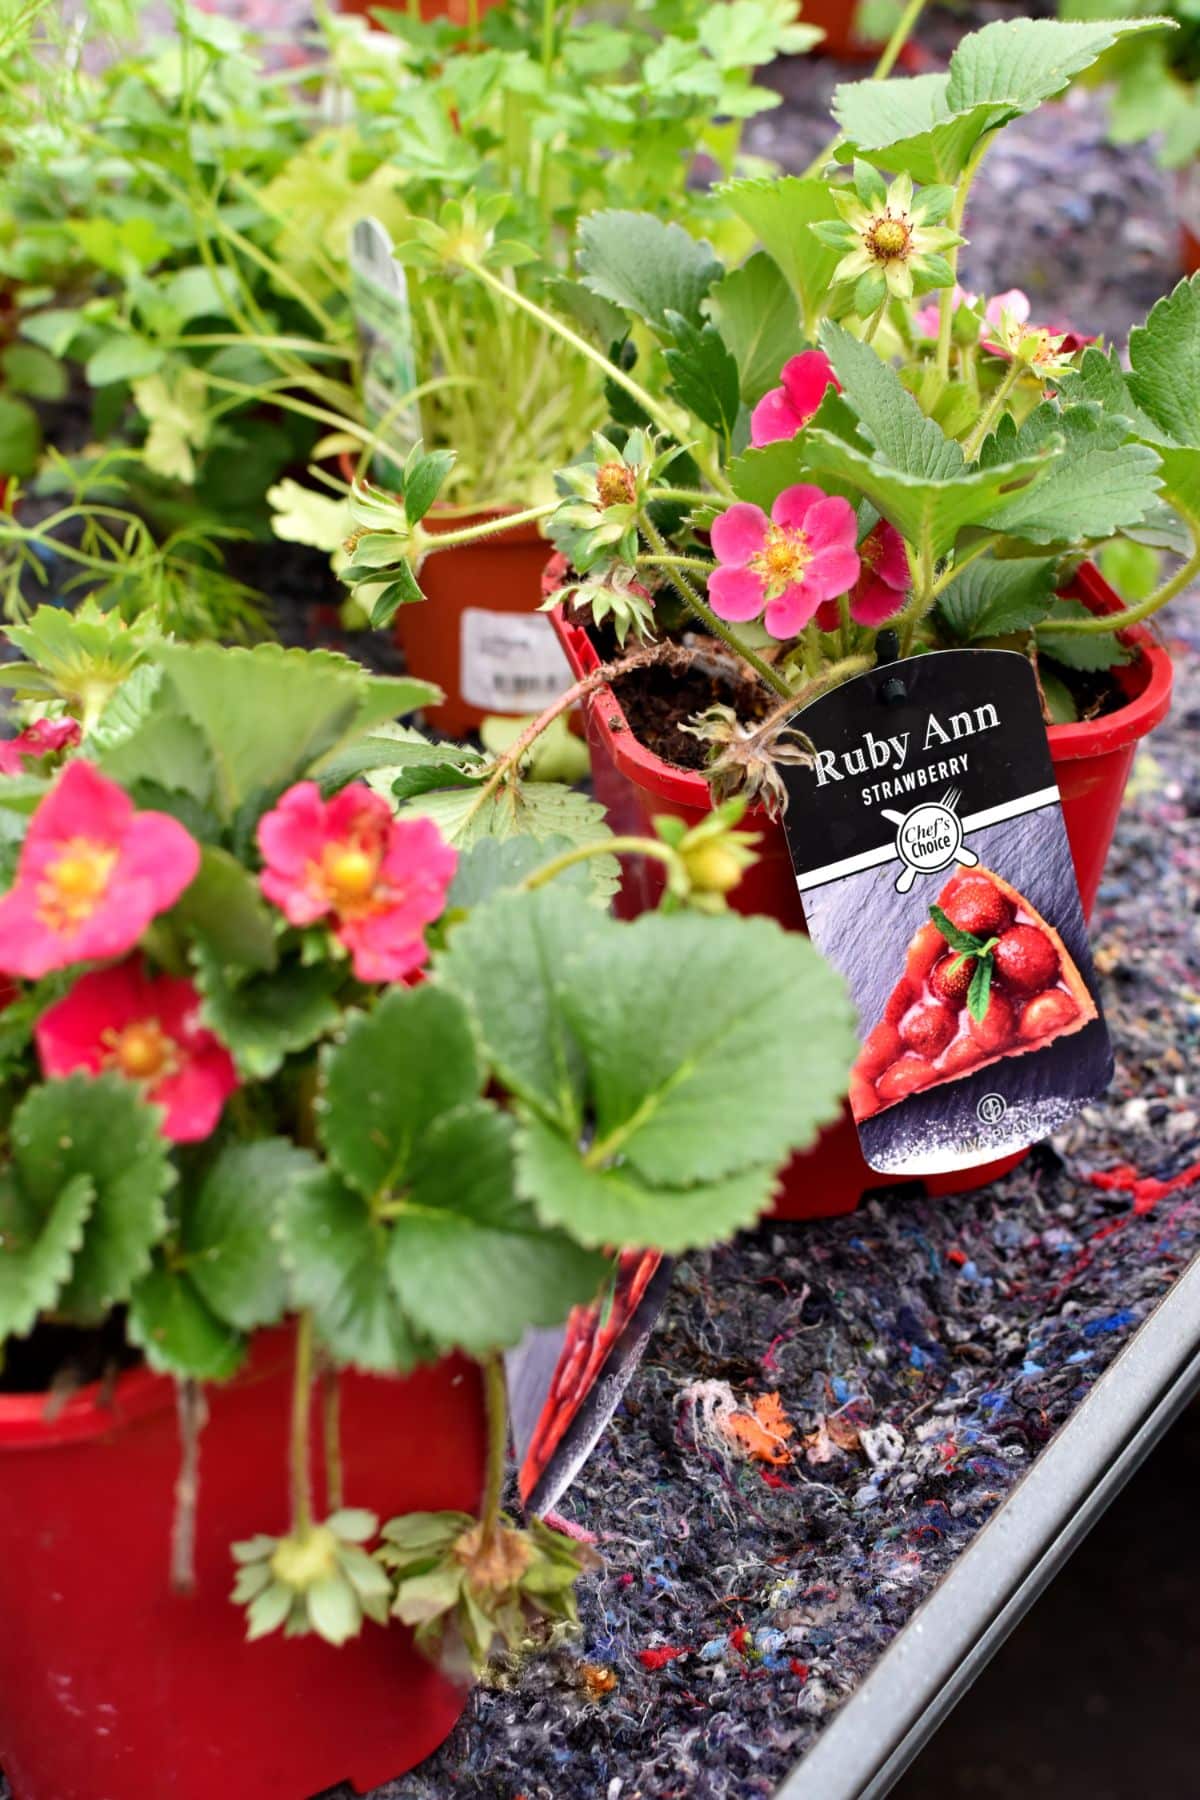 Ruby Ann strawberry plants with pink flowers growing in pots.